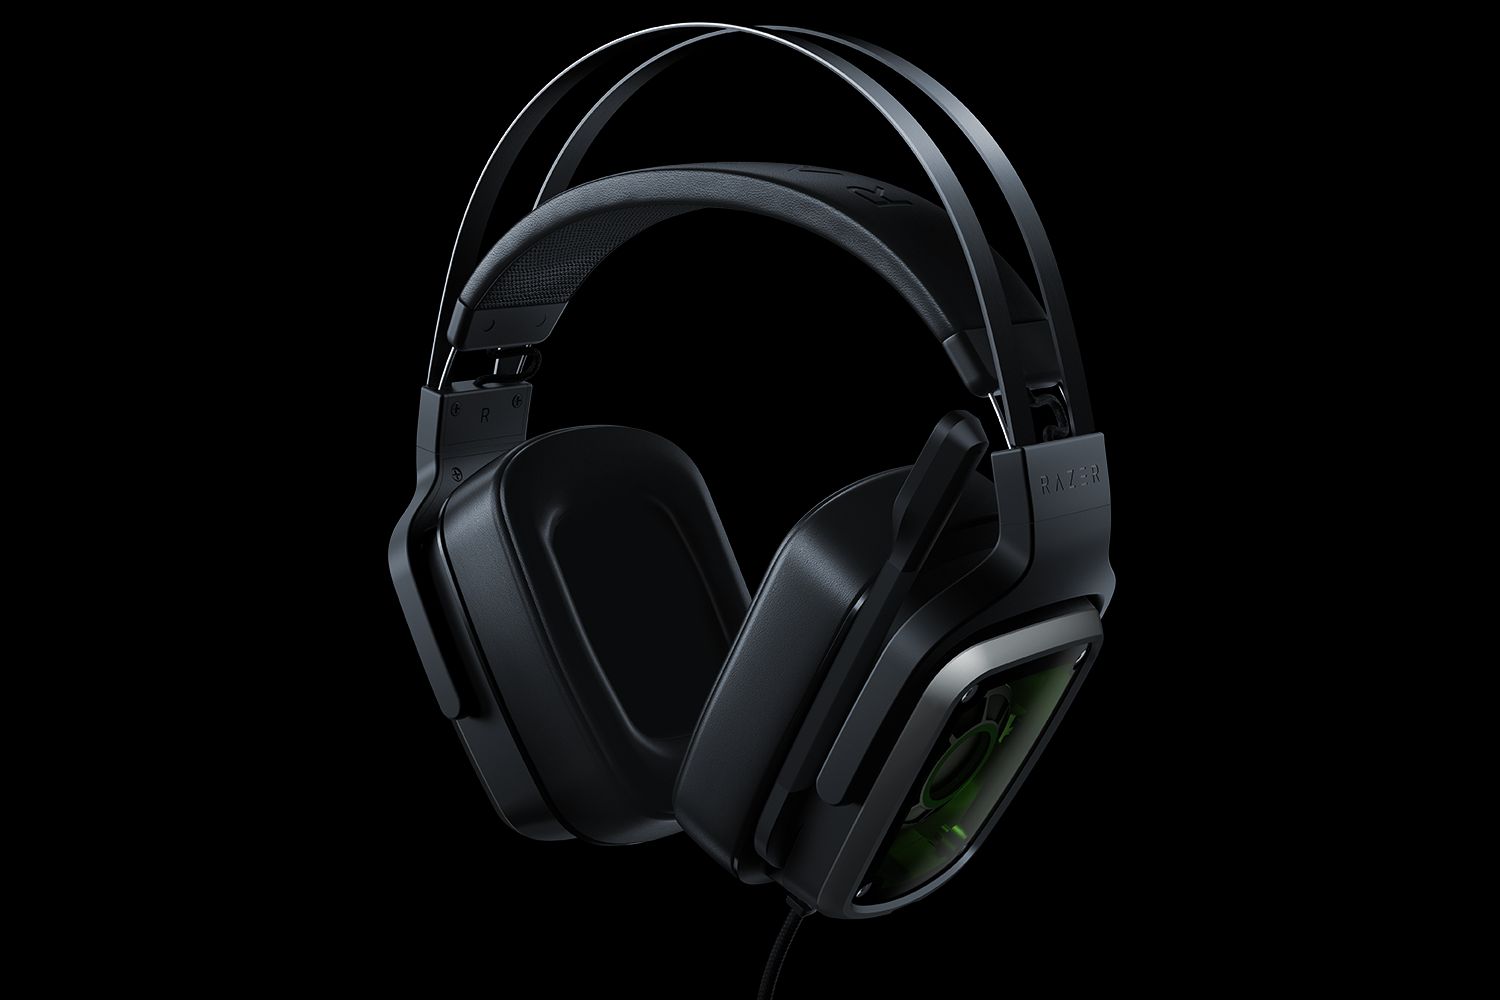 Razer introduces two new analog gaming headsets